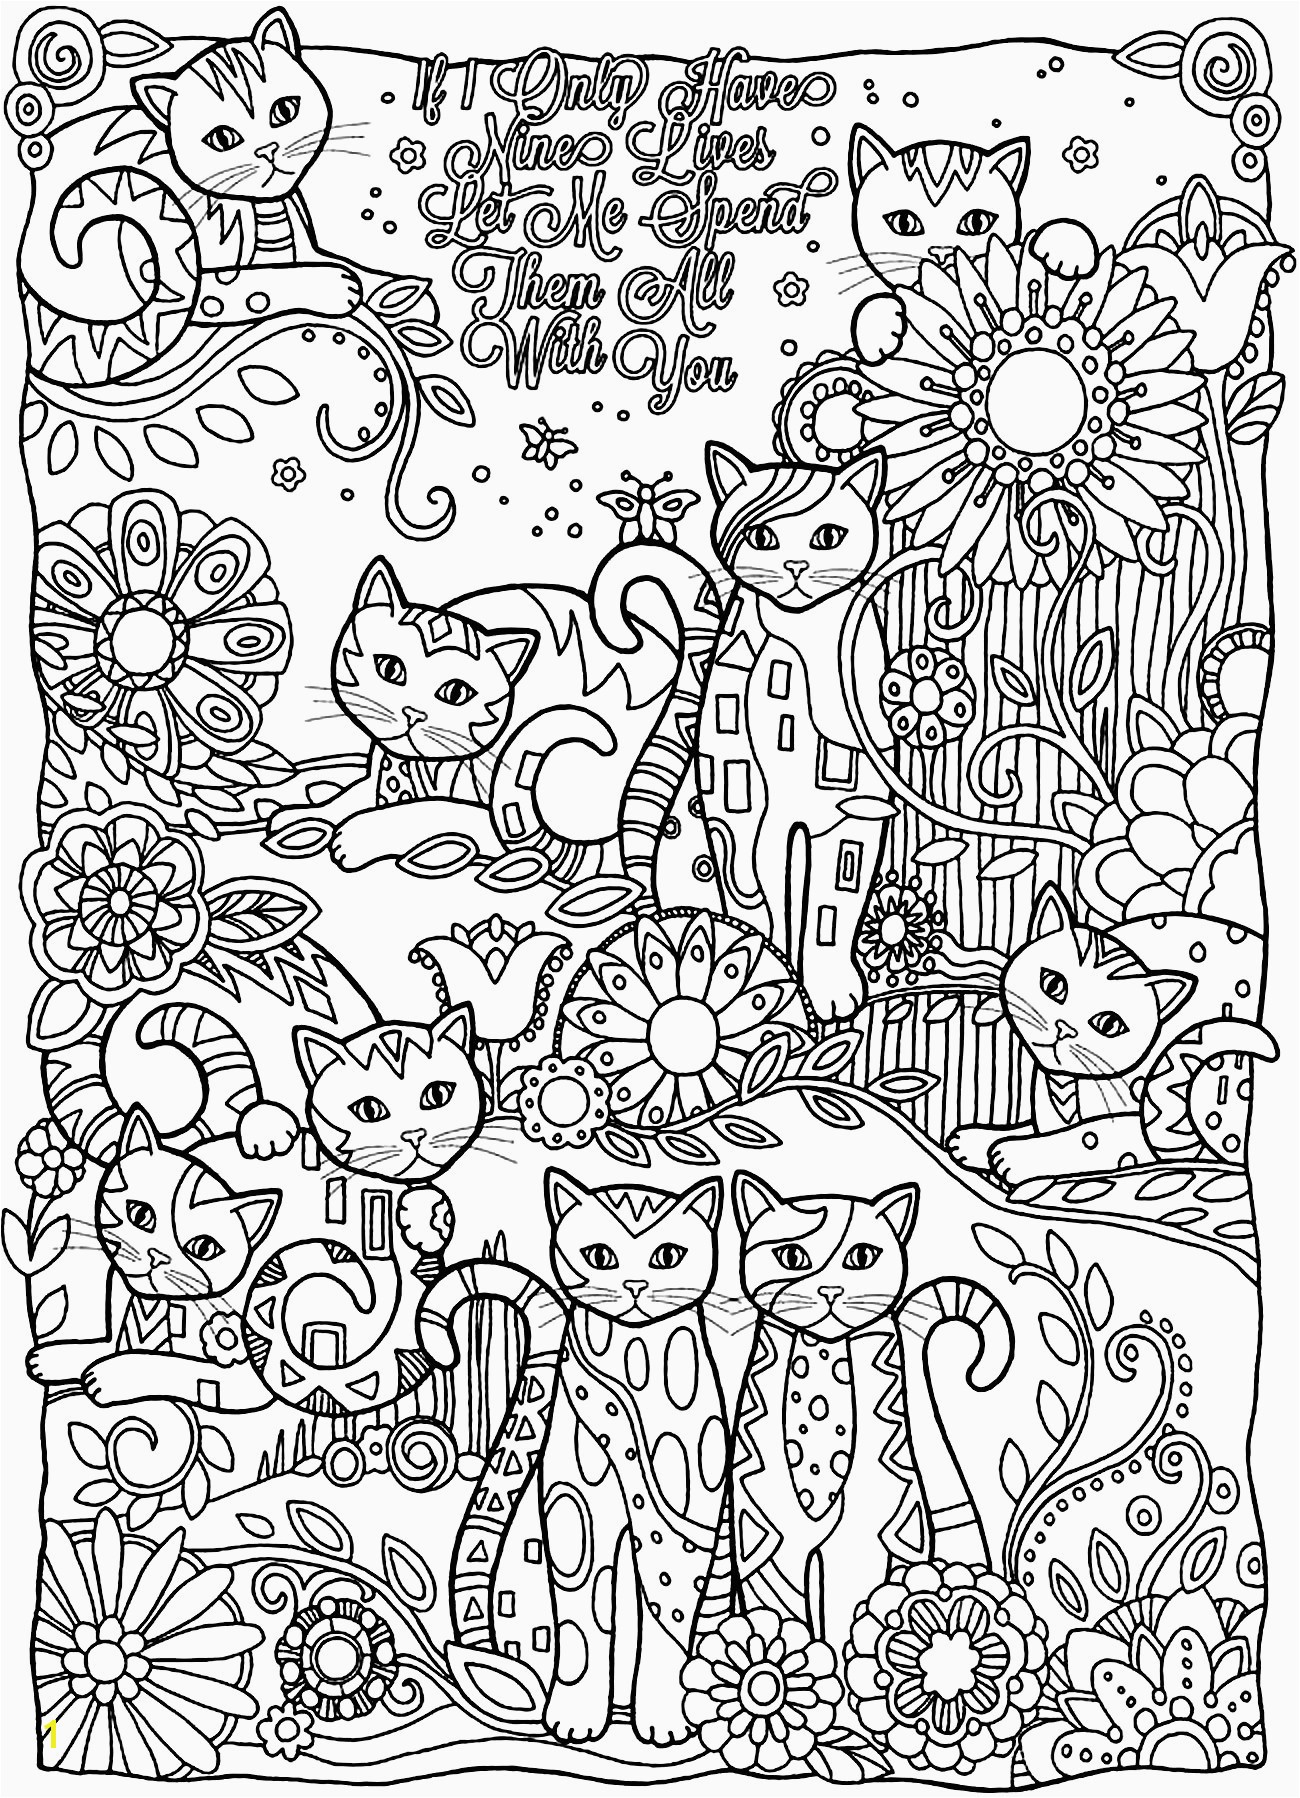 Kitty softpaws Coloring Pages 14 New Kitty softpaws Coloring Pages Collection